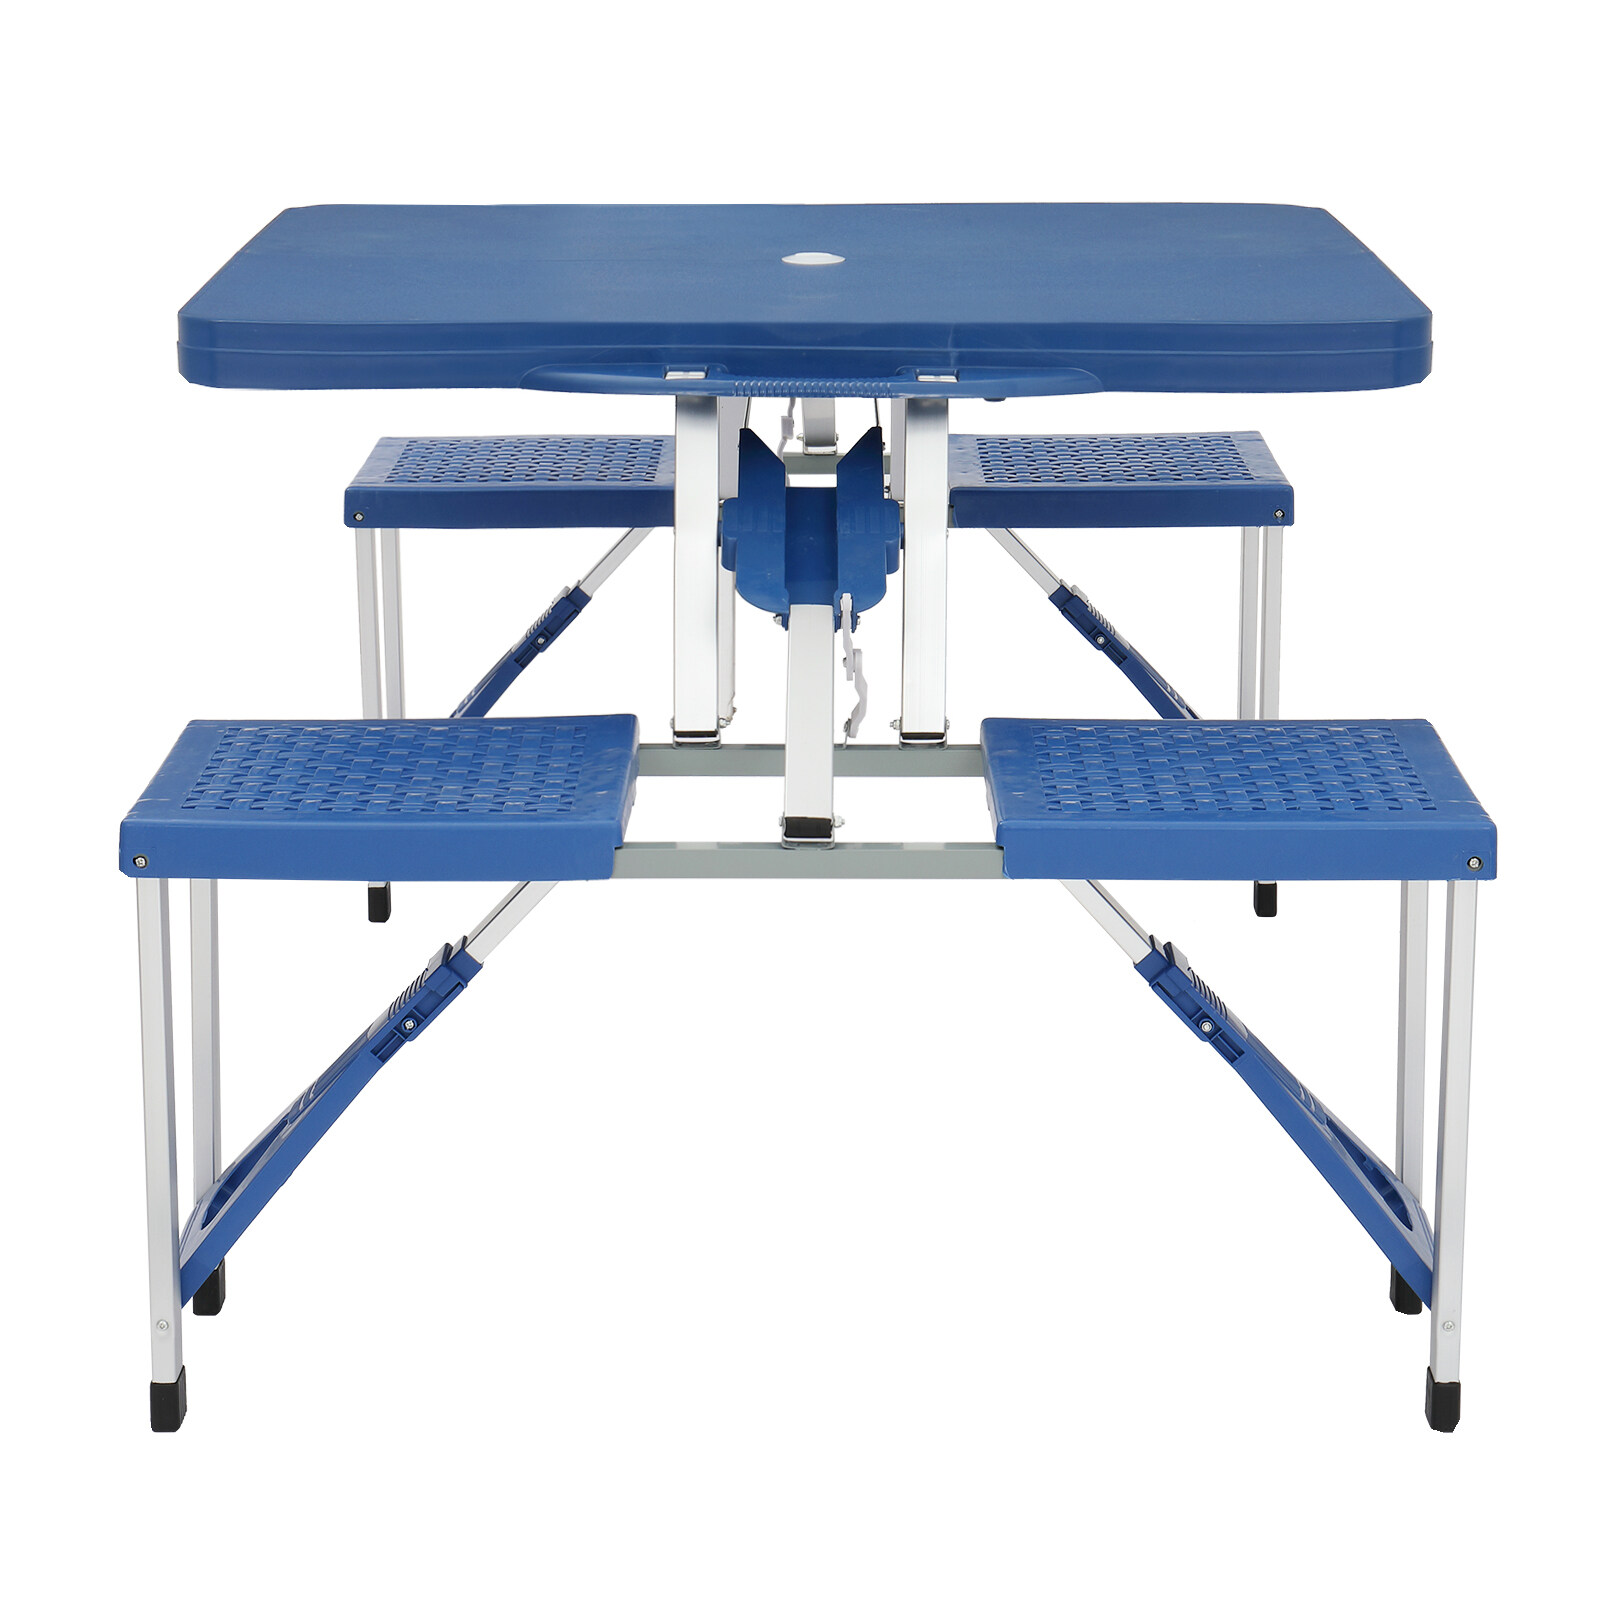 One Piece Folding Table Picnic Table Folding Camping Table Portable Picnic Table Camping Table,Lightweight Compact Aluminum Picnic Table with 4 Seats Chairs and Umbrella Hole for Outdoor Indoor,Blue - image 4 of 9